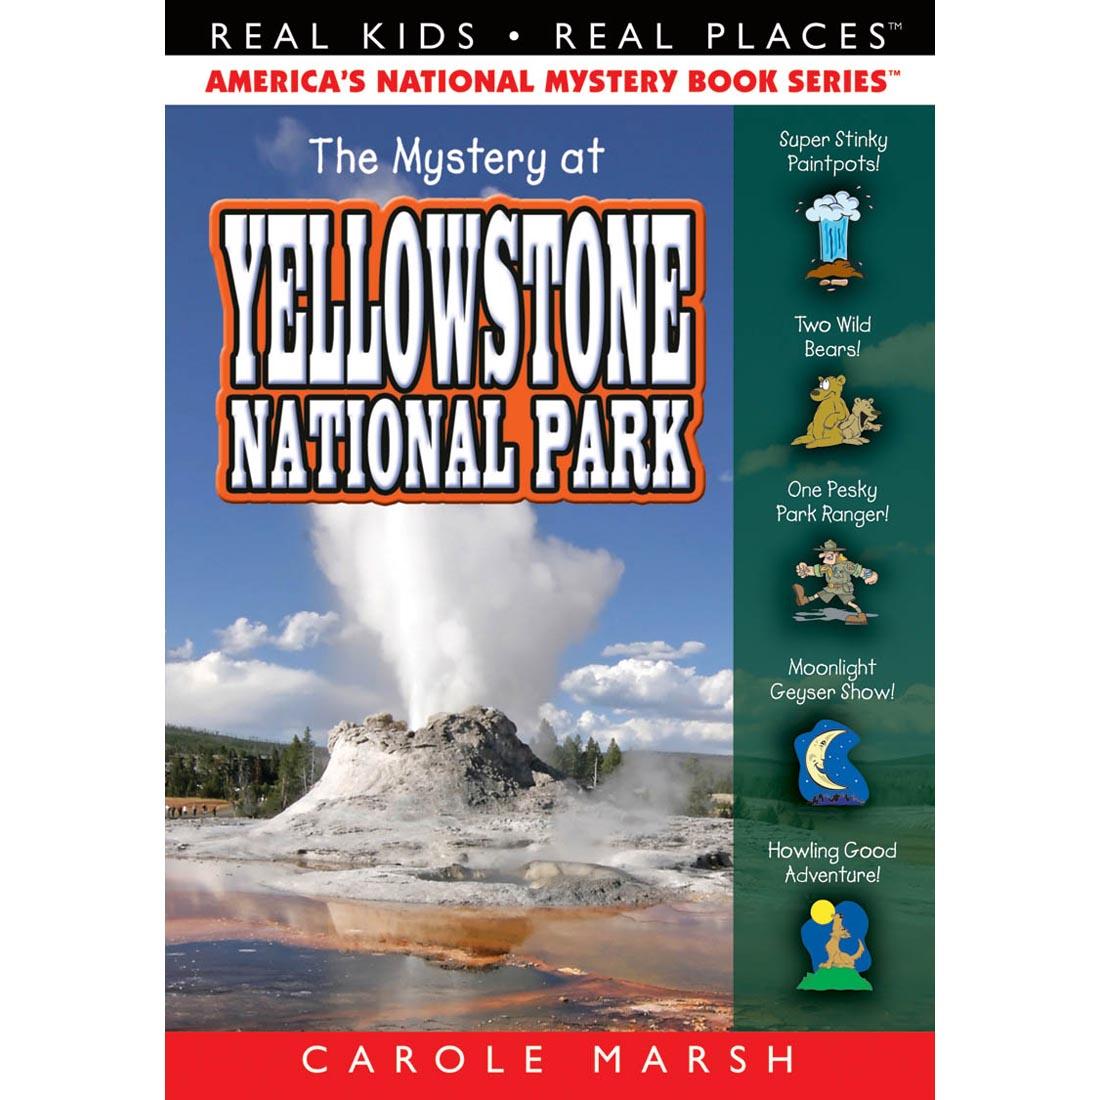 The Mystery at Yellowstone National Park